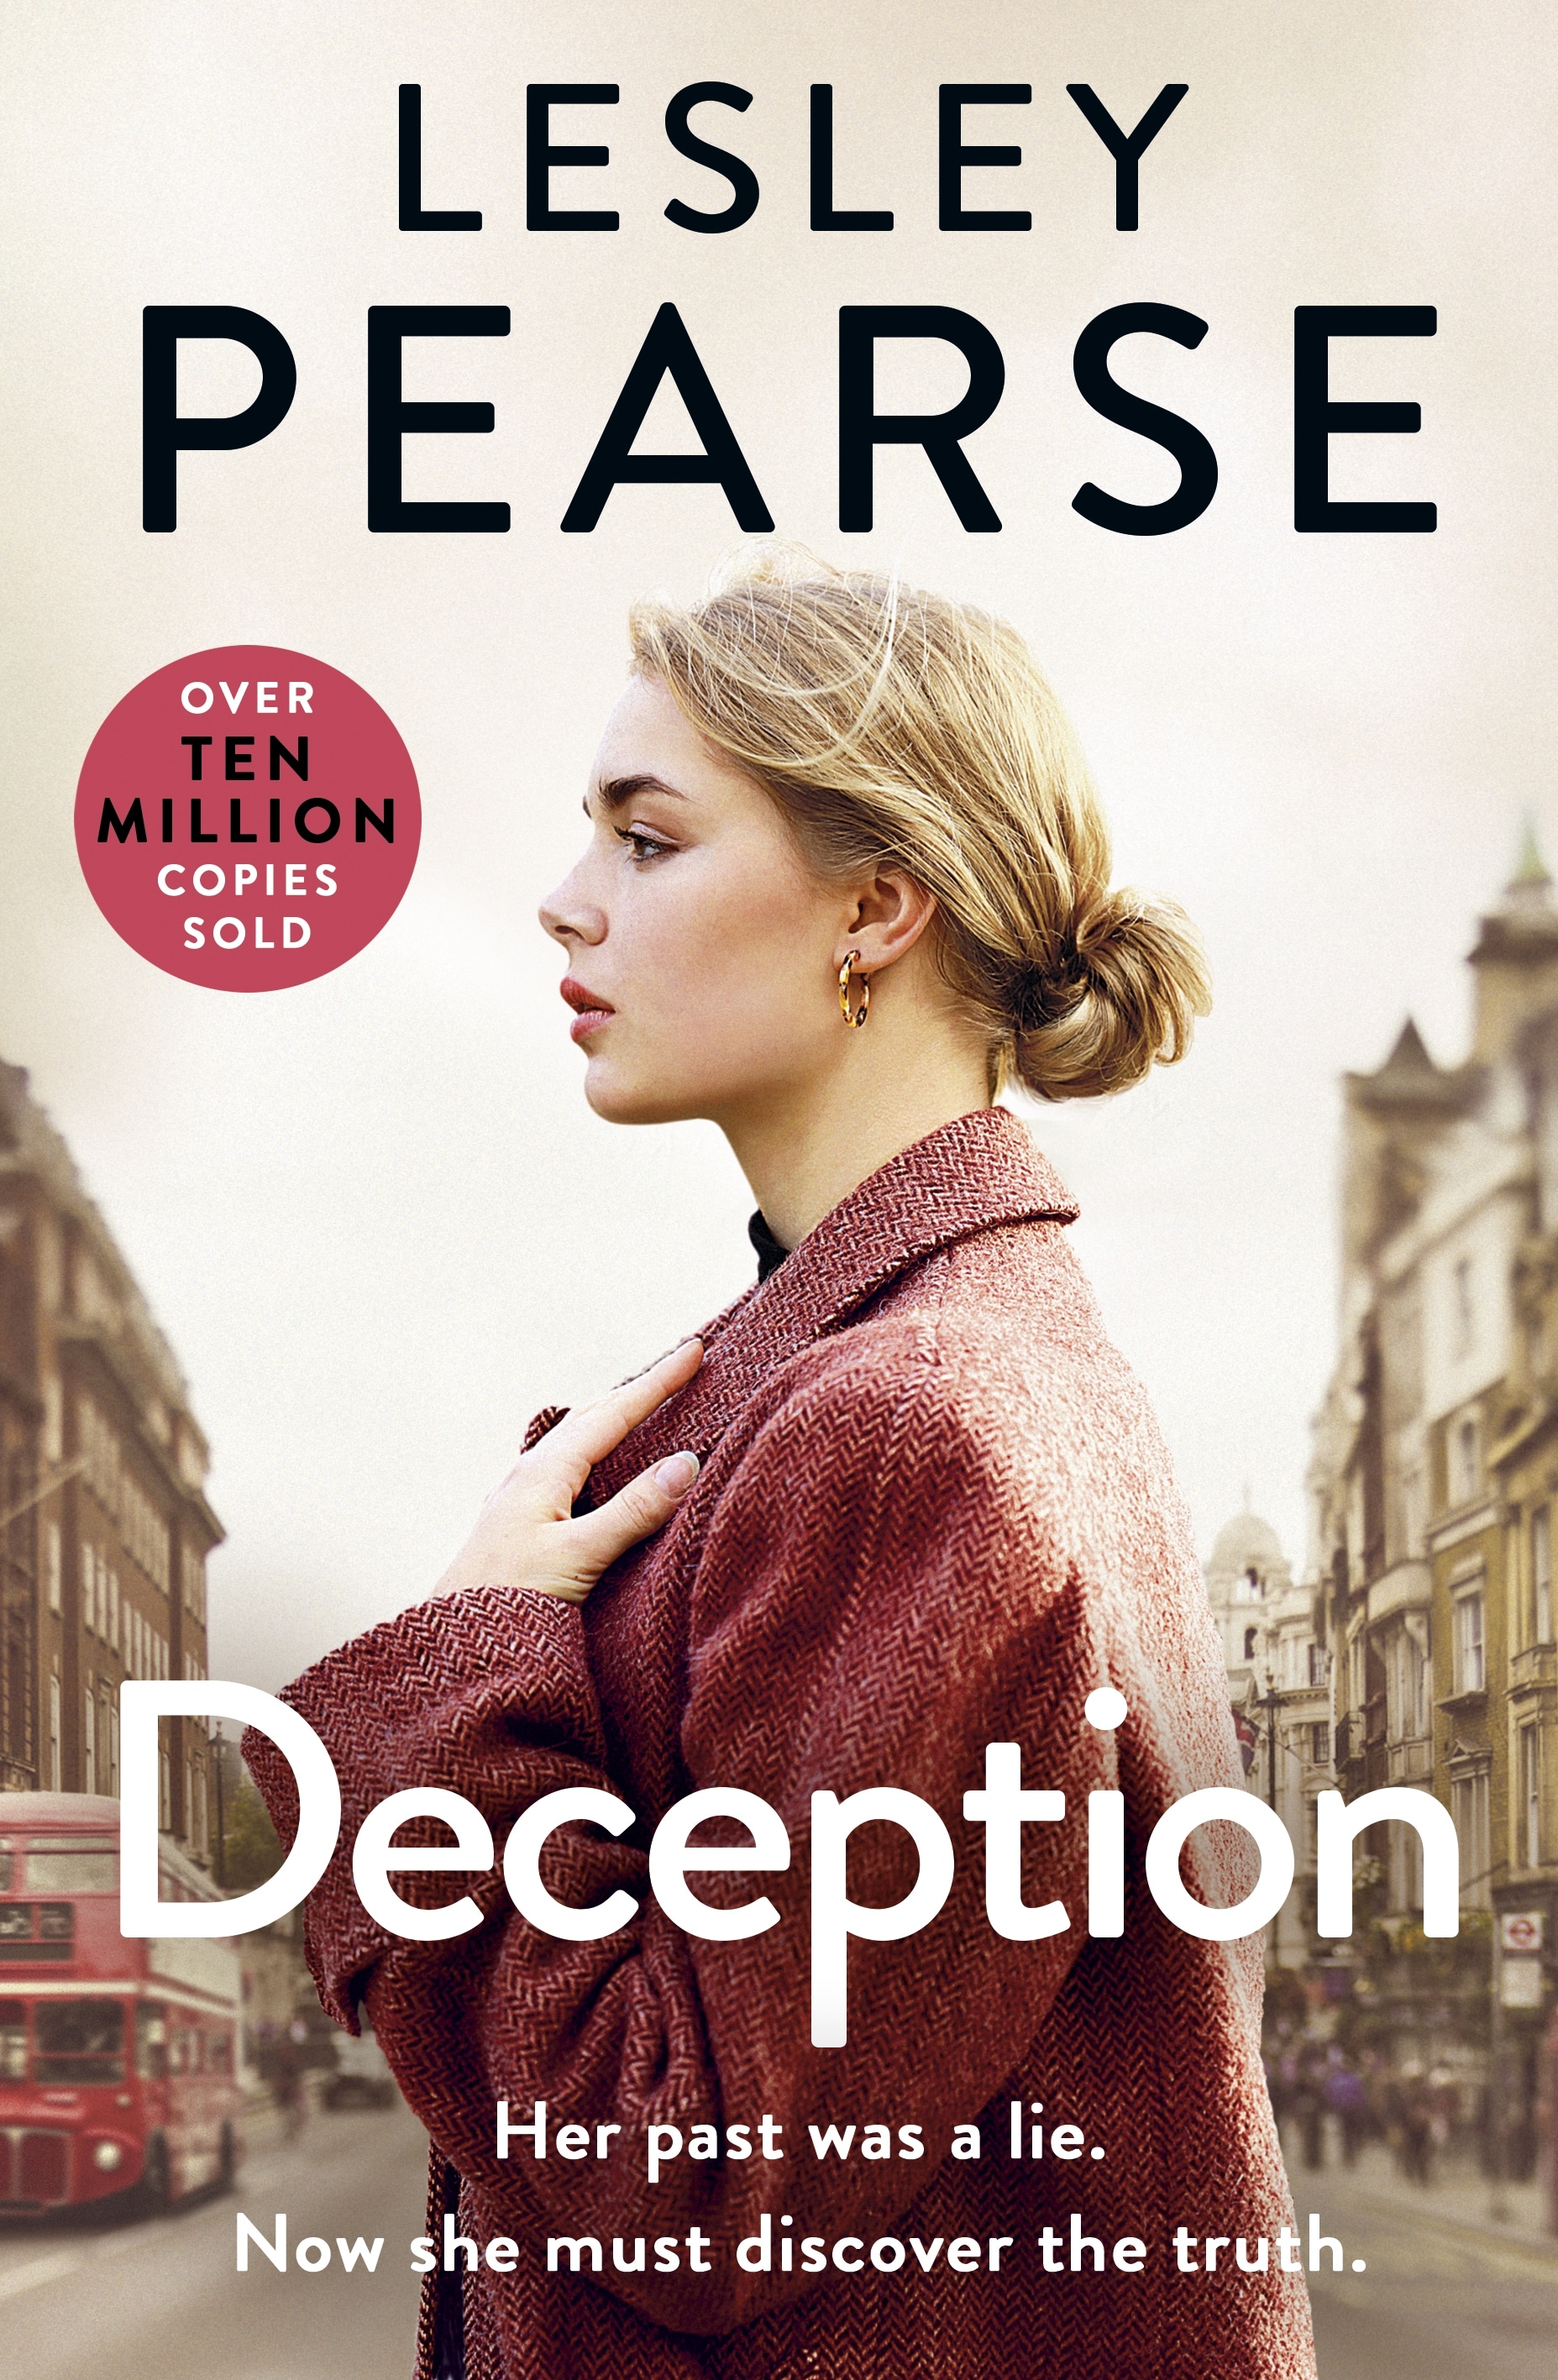 Book “Deception” by Lesley Pearse — June 23, 2022